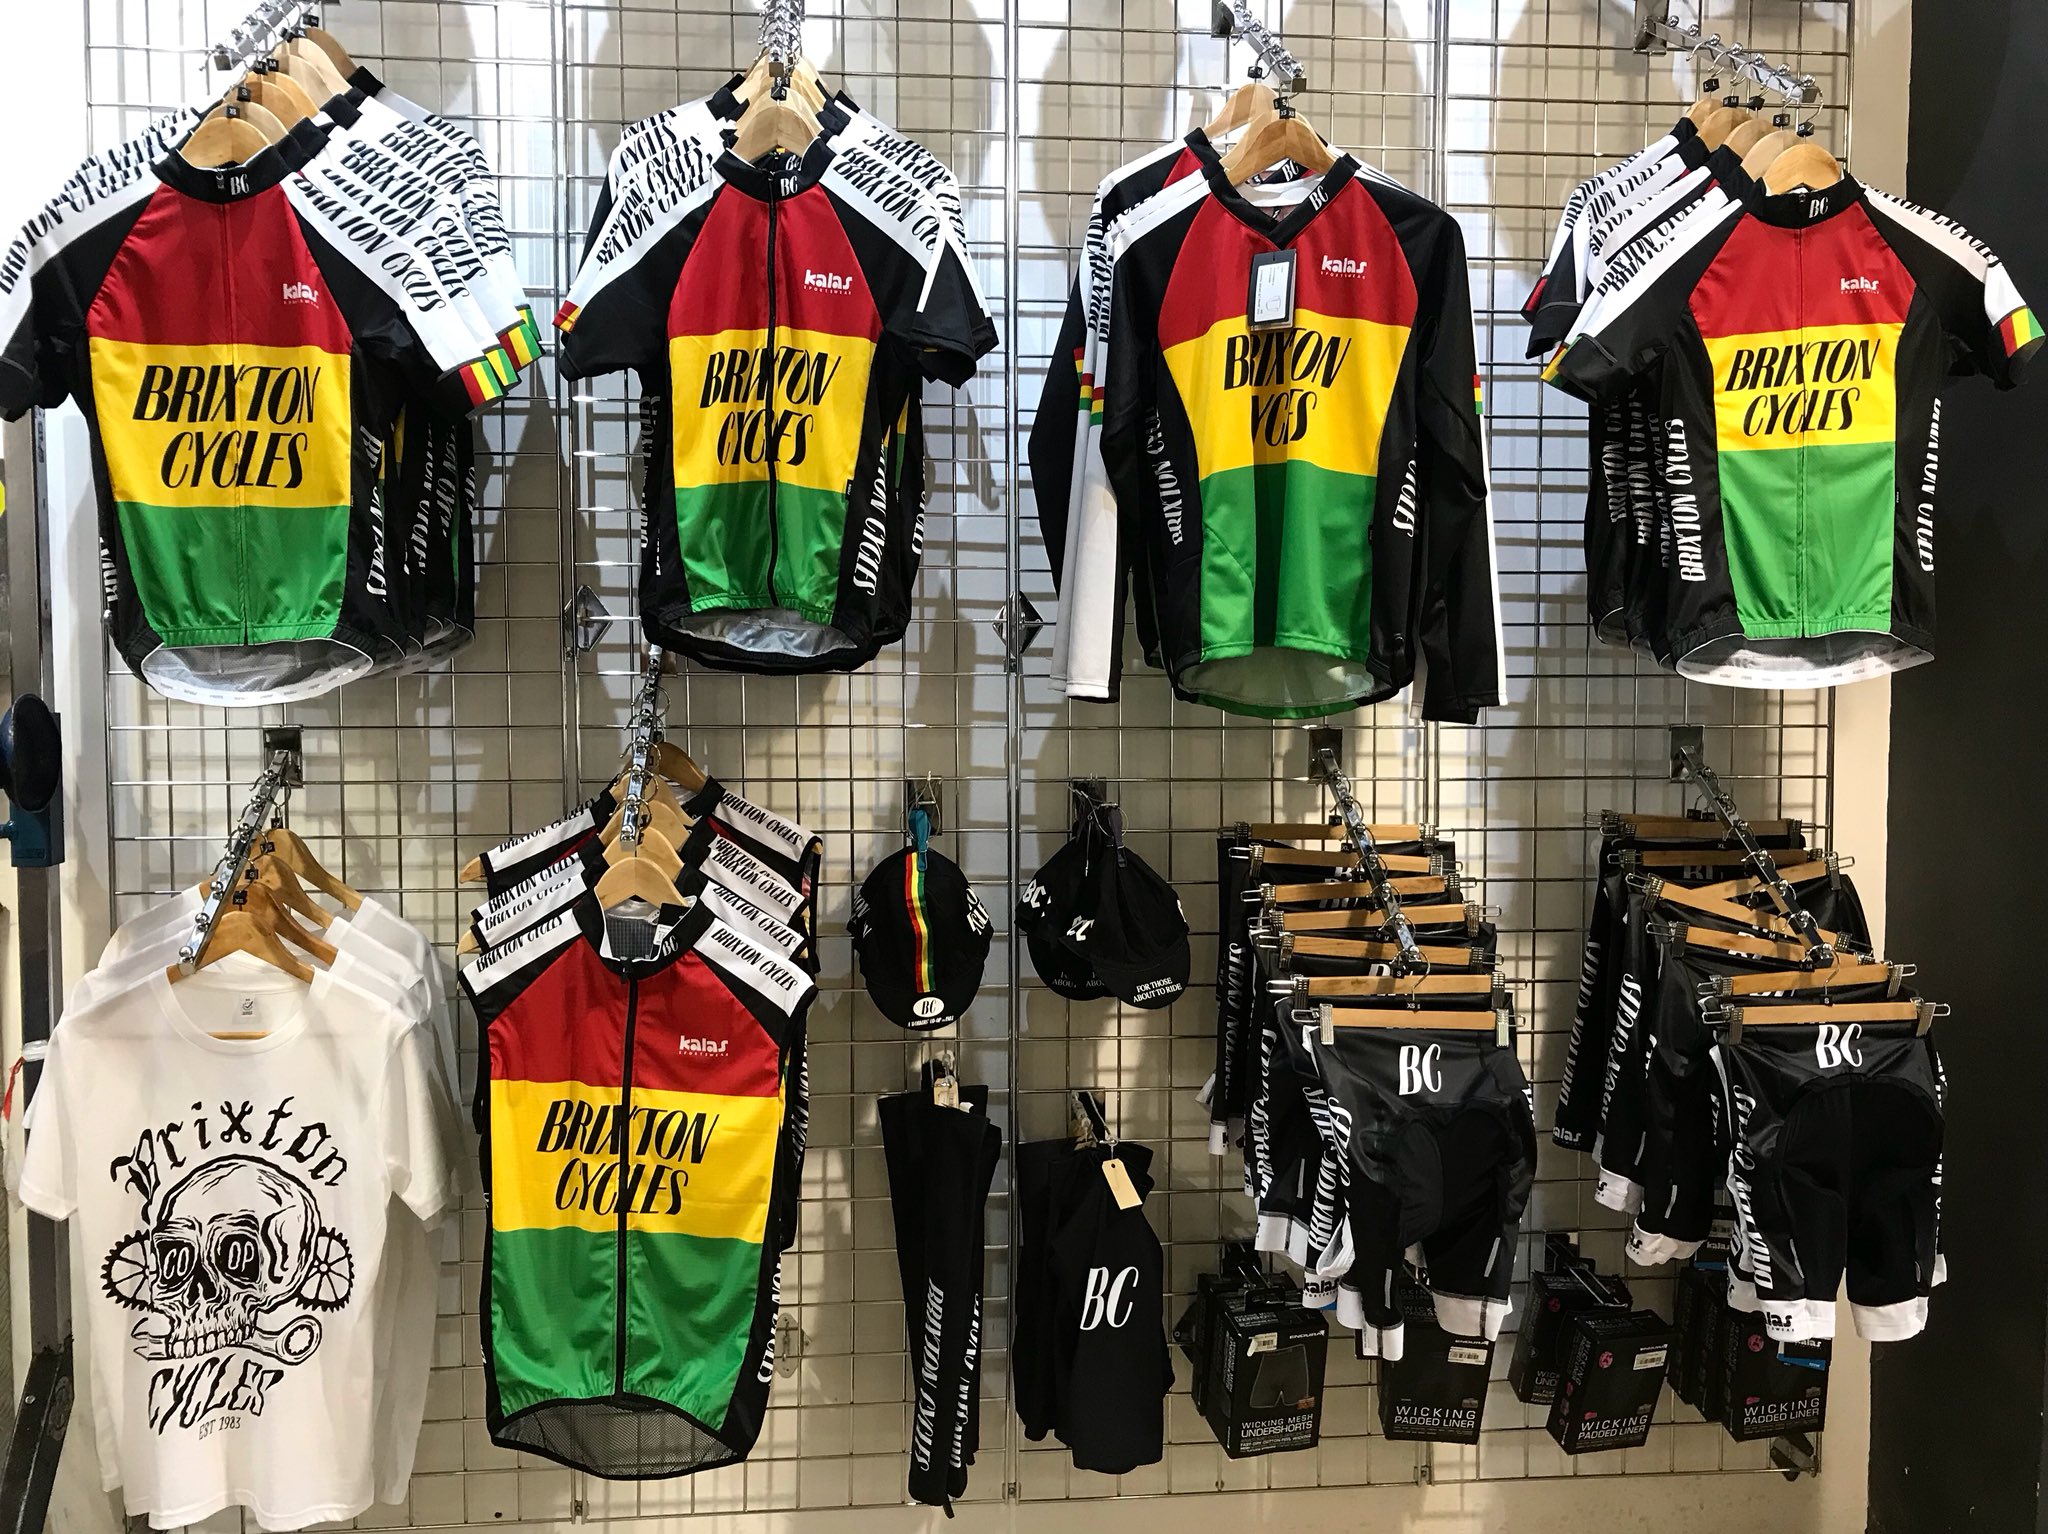 patrouille mooi zo Converteren Brixton Cycles Workers' Co-op on Twitter: "Our iconic red, gold and green  cycling kit is back in stock in all shapes and sizes! 🍅🍋🥦  https://t.co/fB7tqG38Fk" / Twitter